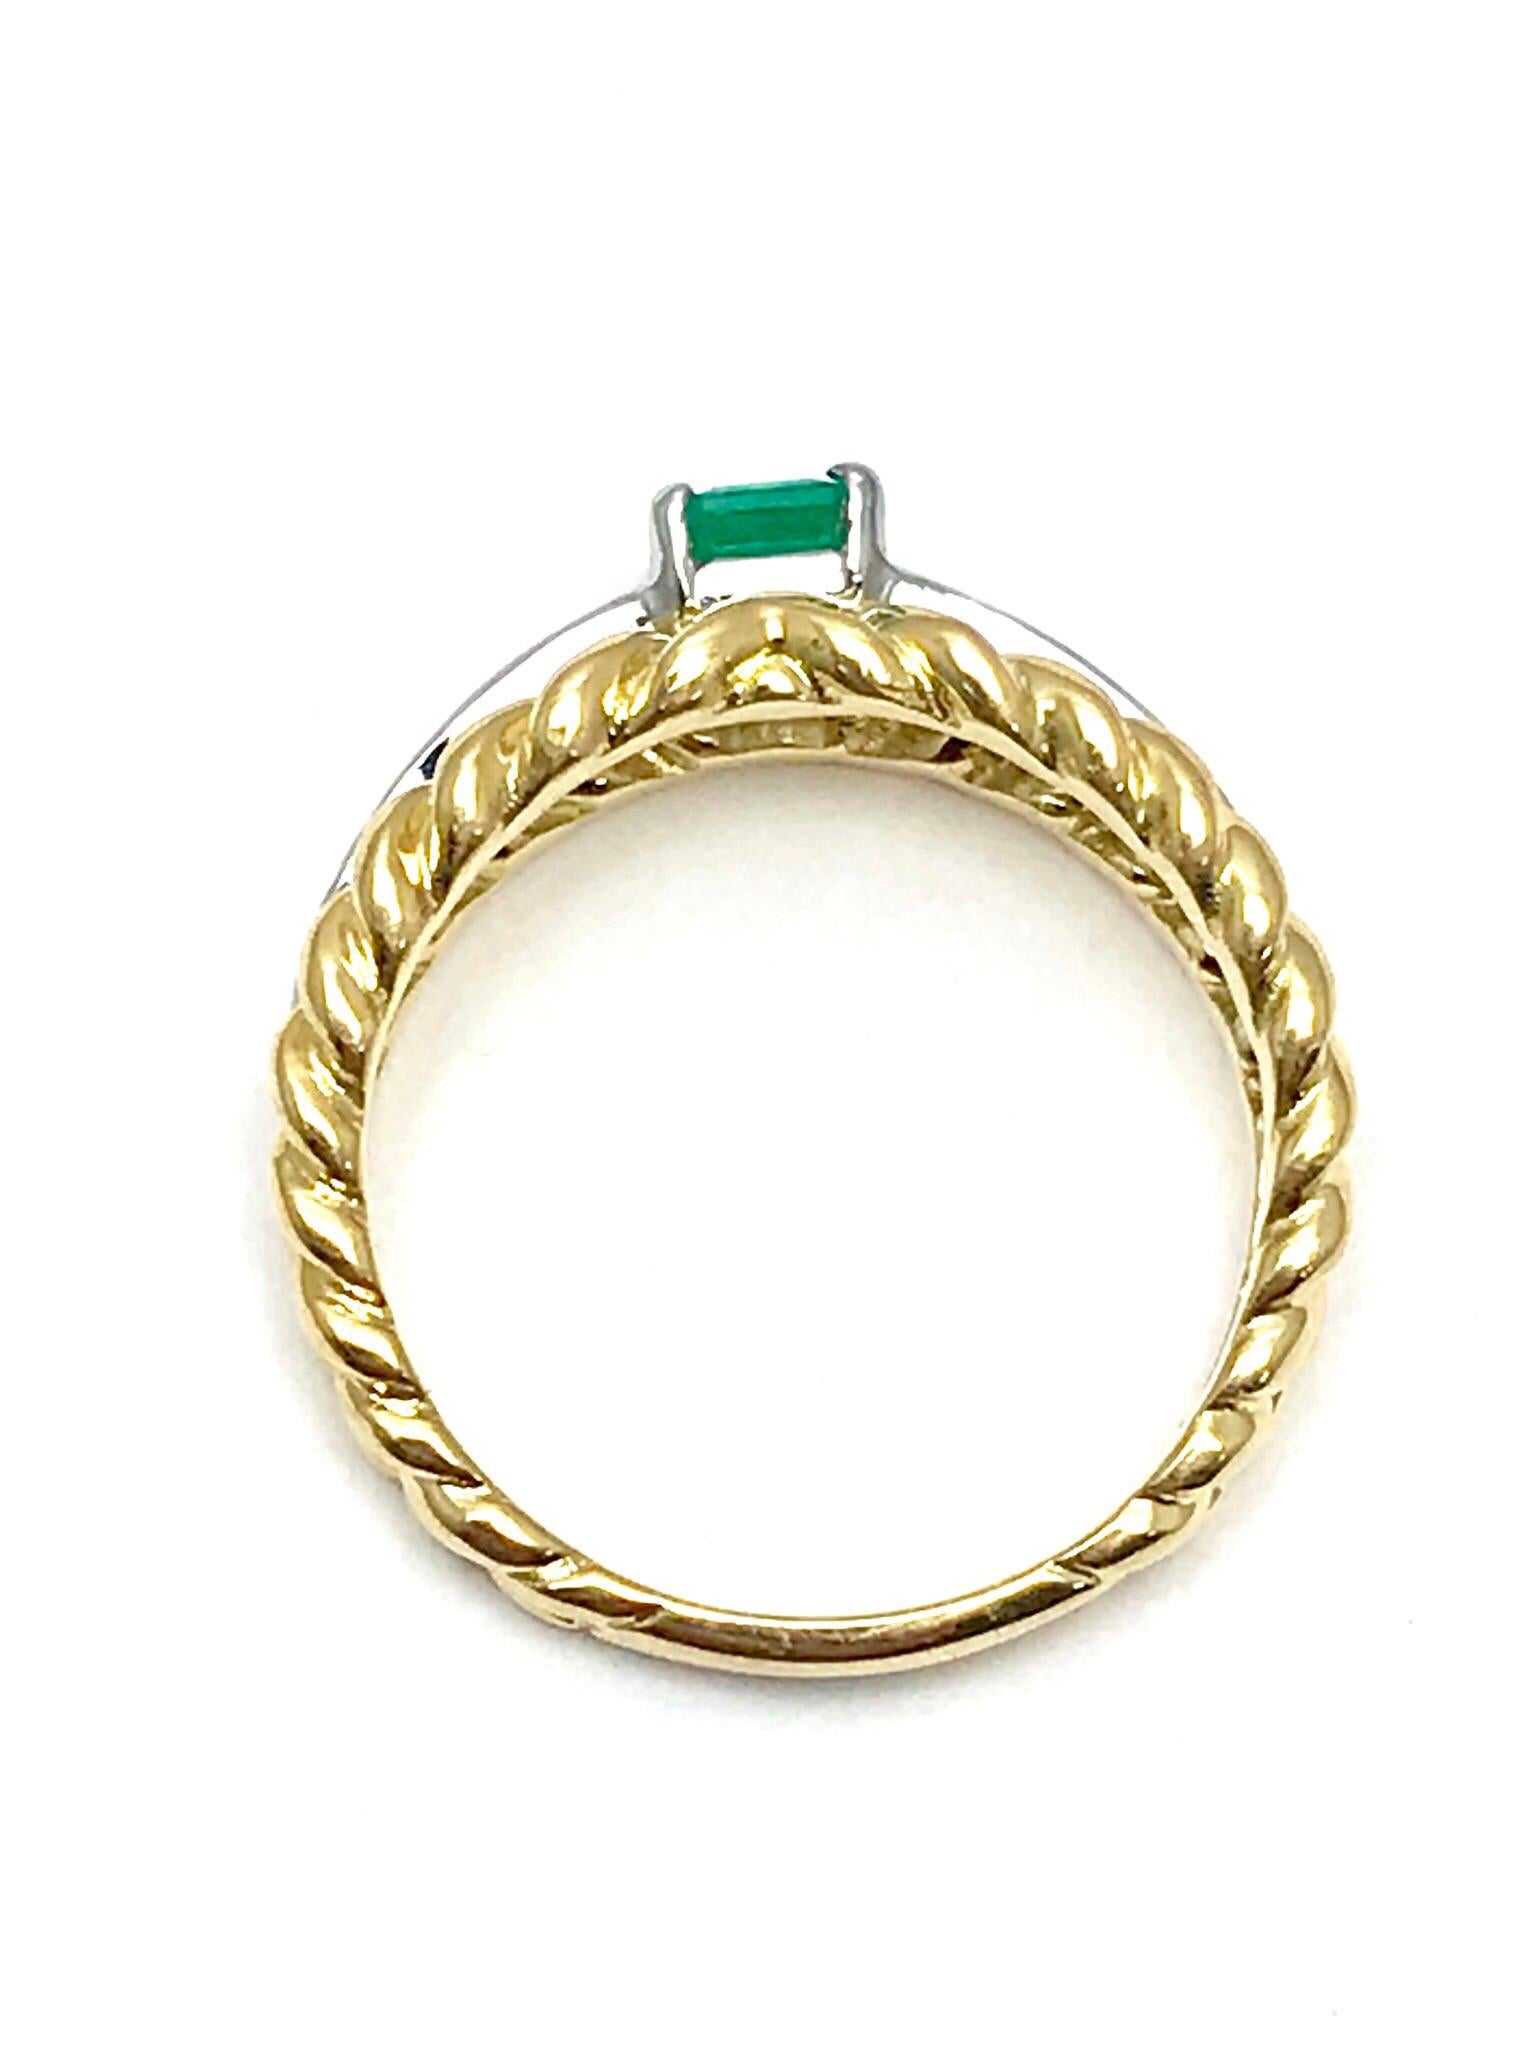 Modern Van Cleef & Arpels Emerald and Diamond Platinum and Yellow Gold Ring